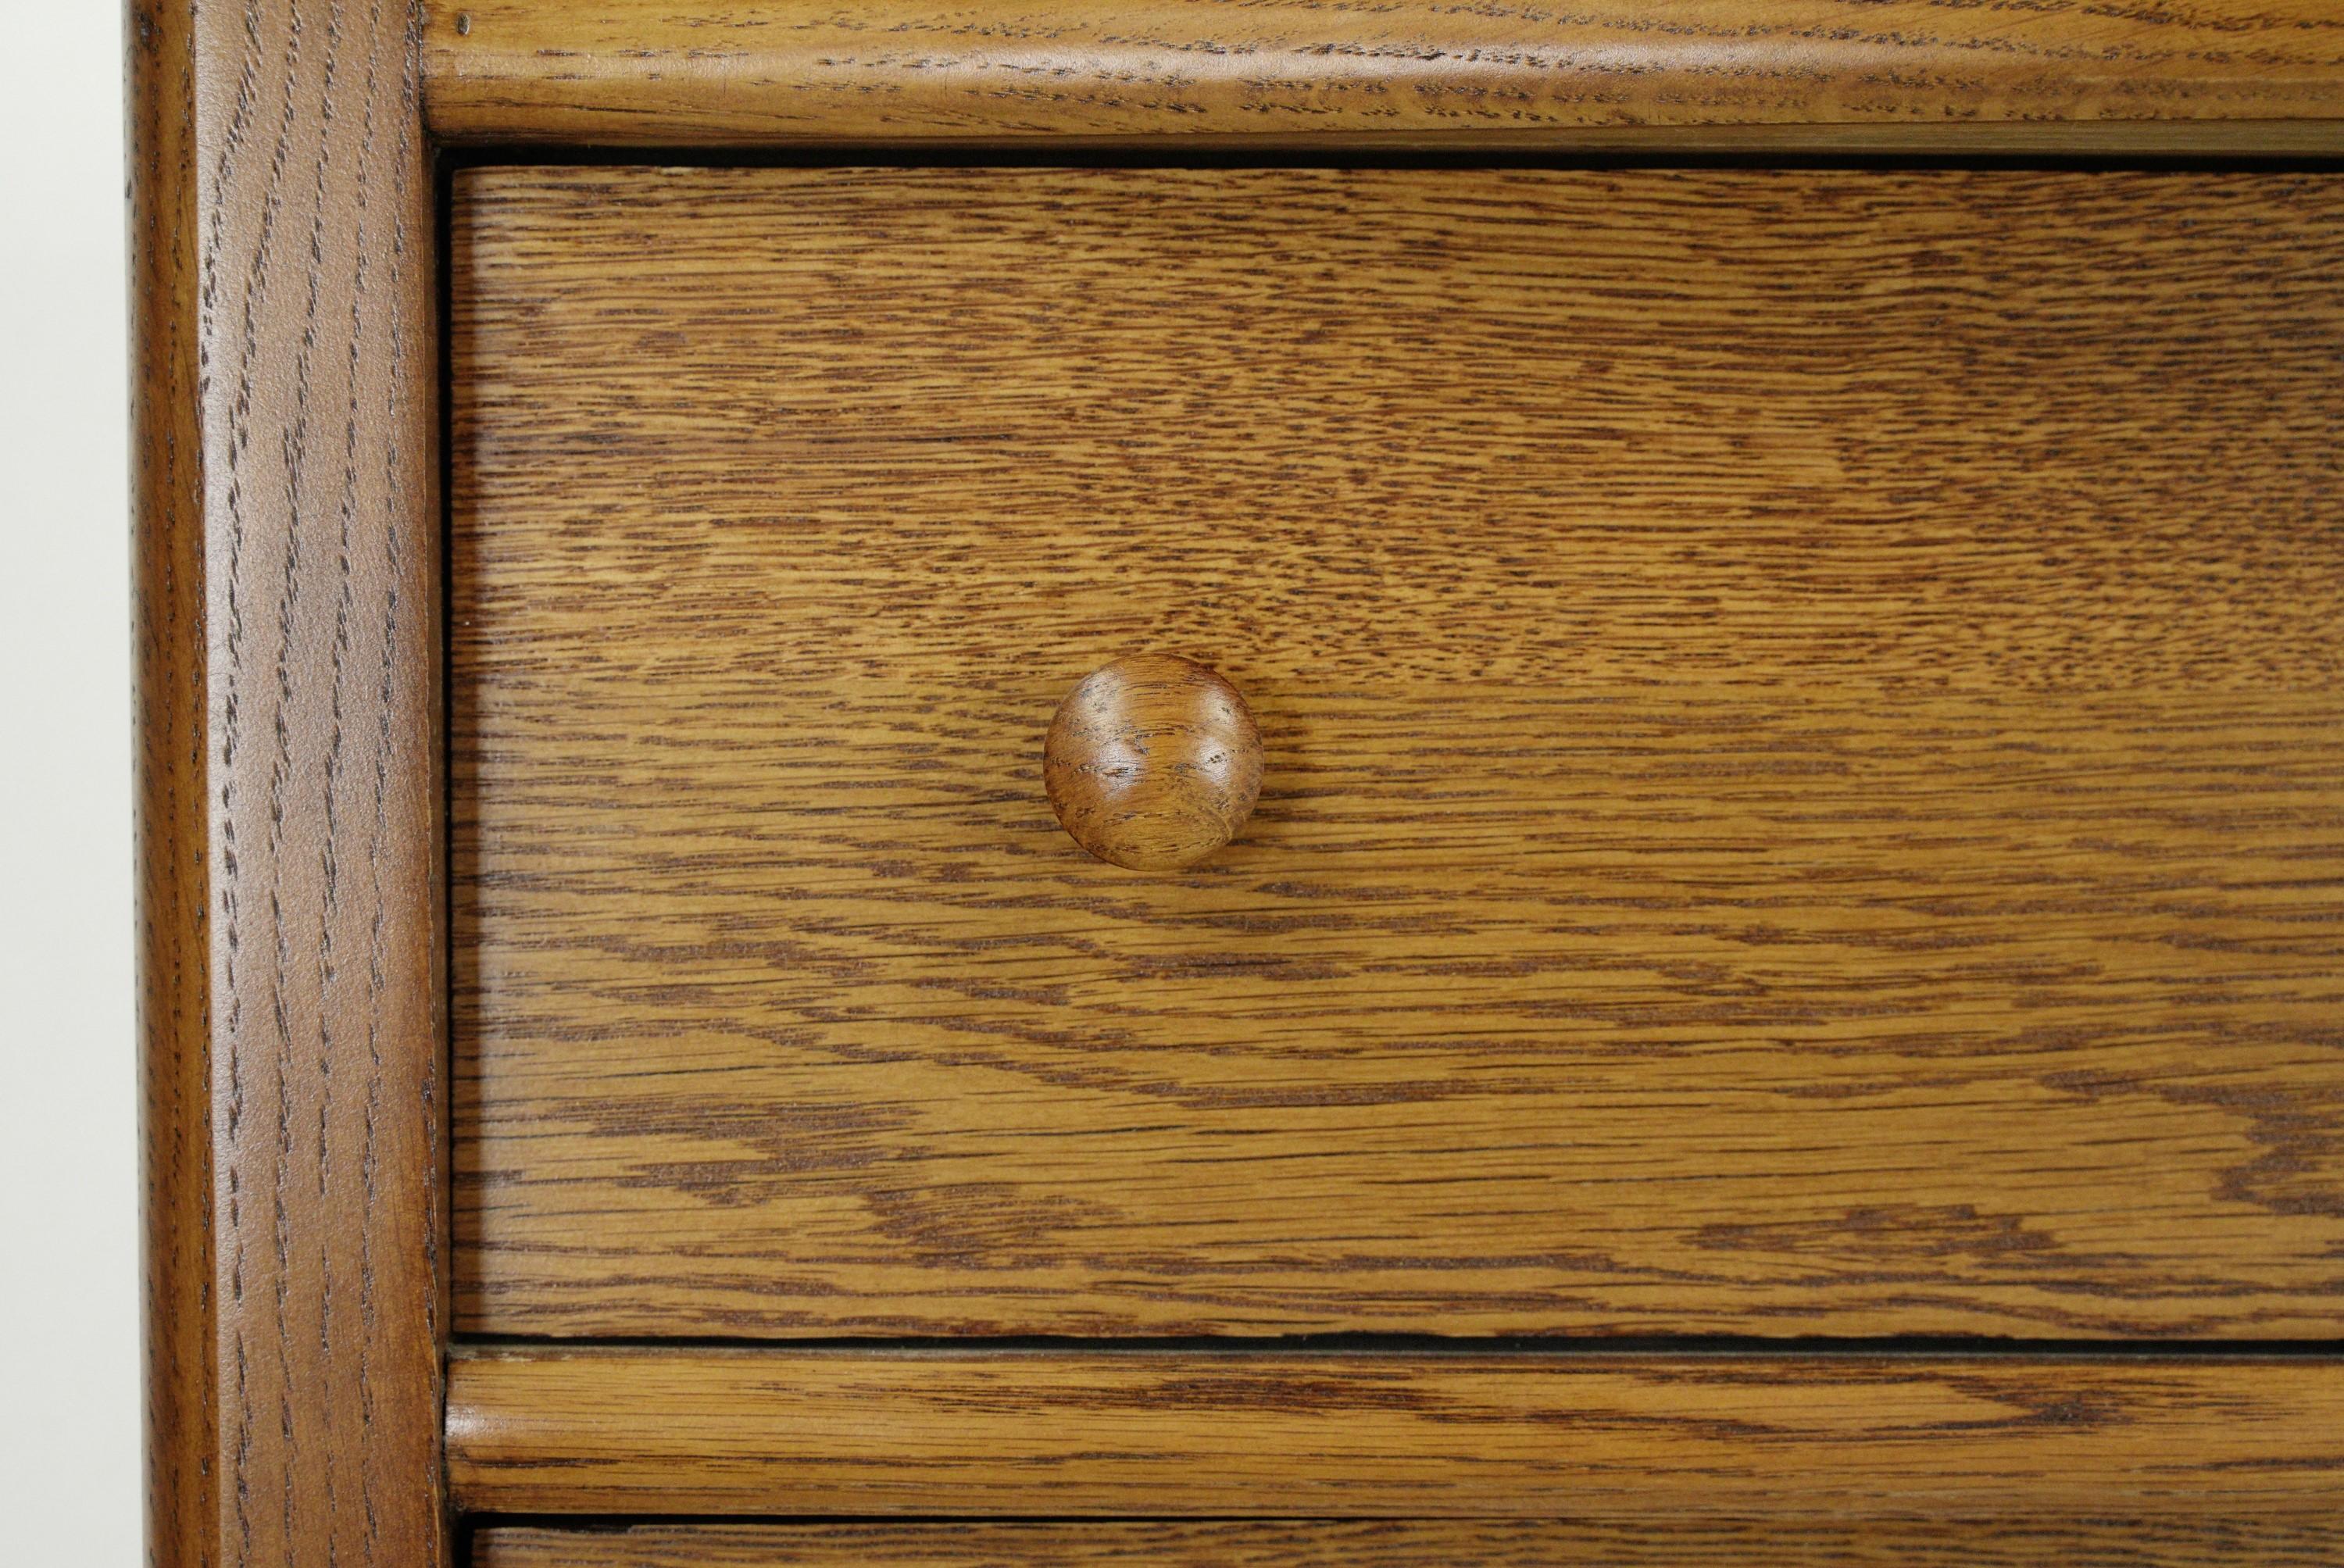 Restored antique medium tone oak high boy dresser with 6 dovetailed drawers and casters. This piece was restored in our shop. Good condition with appropriate wear from age. One available. Please note, this item is located in one of our NYC locations.